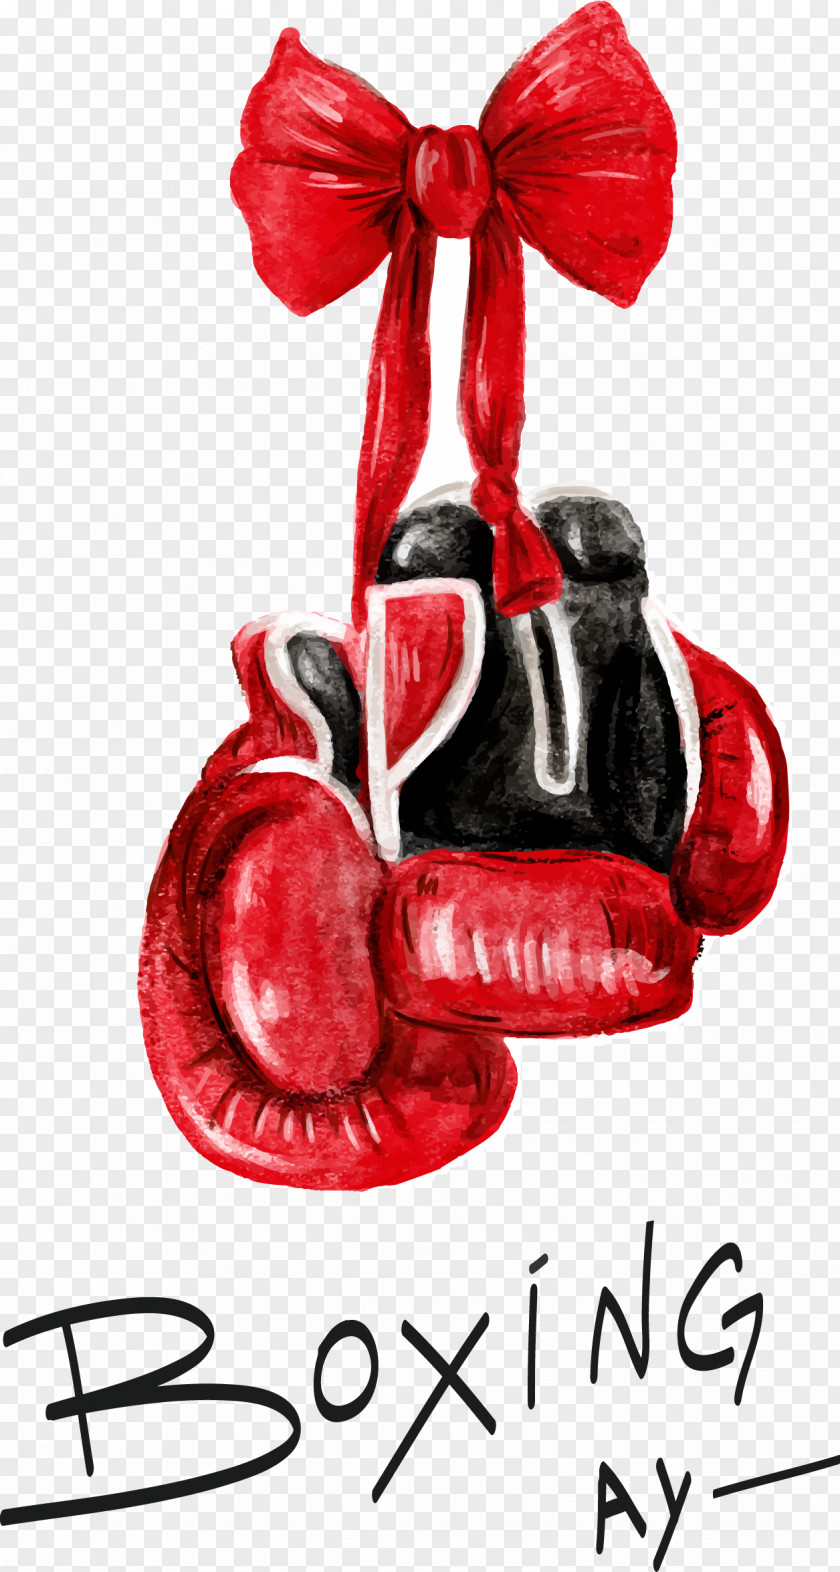 Vector Hand-painted Boxing Gloves Glove Watercolor Painting PNG